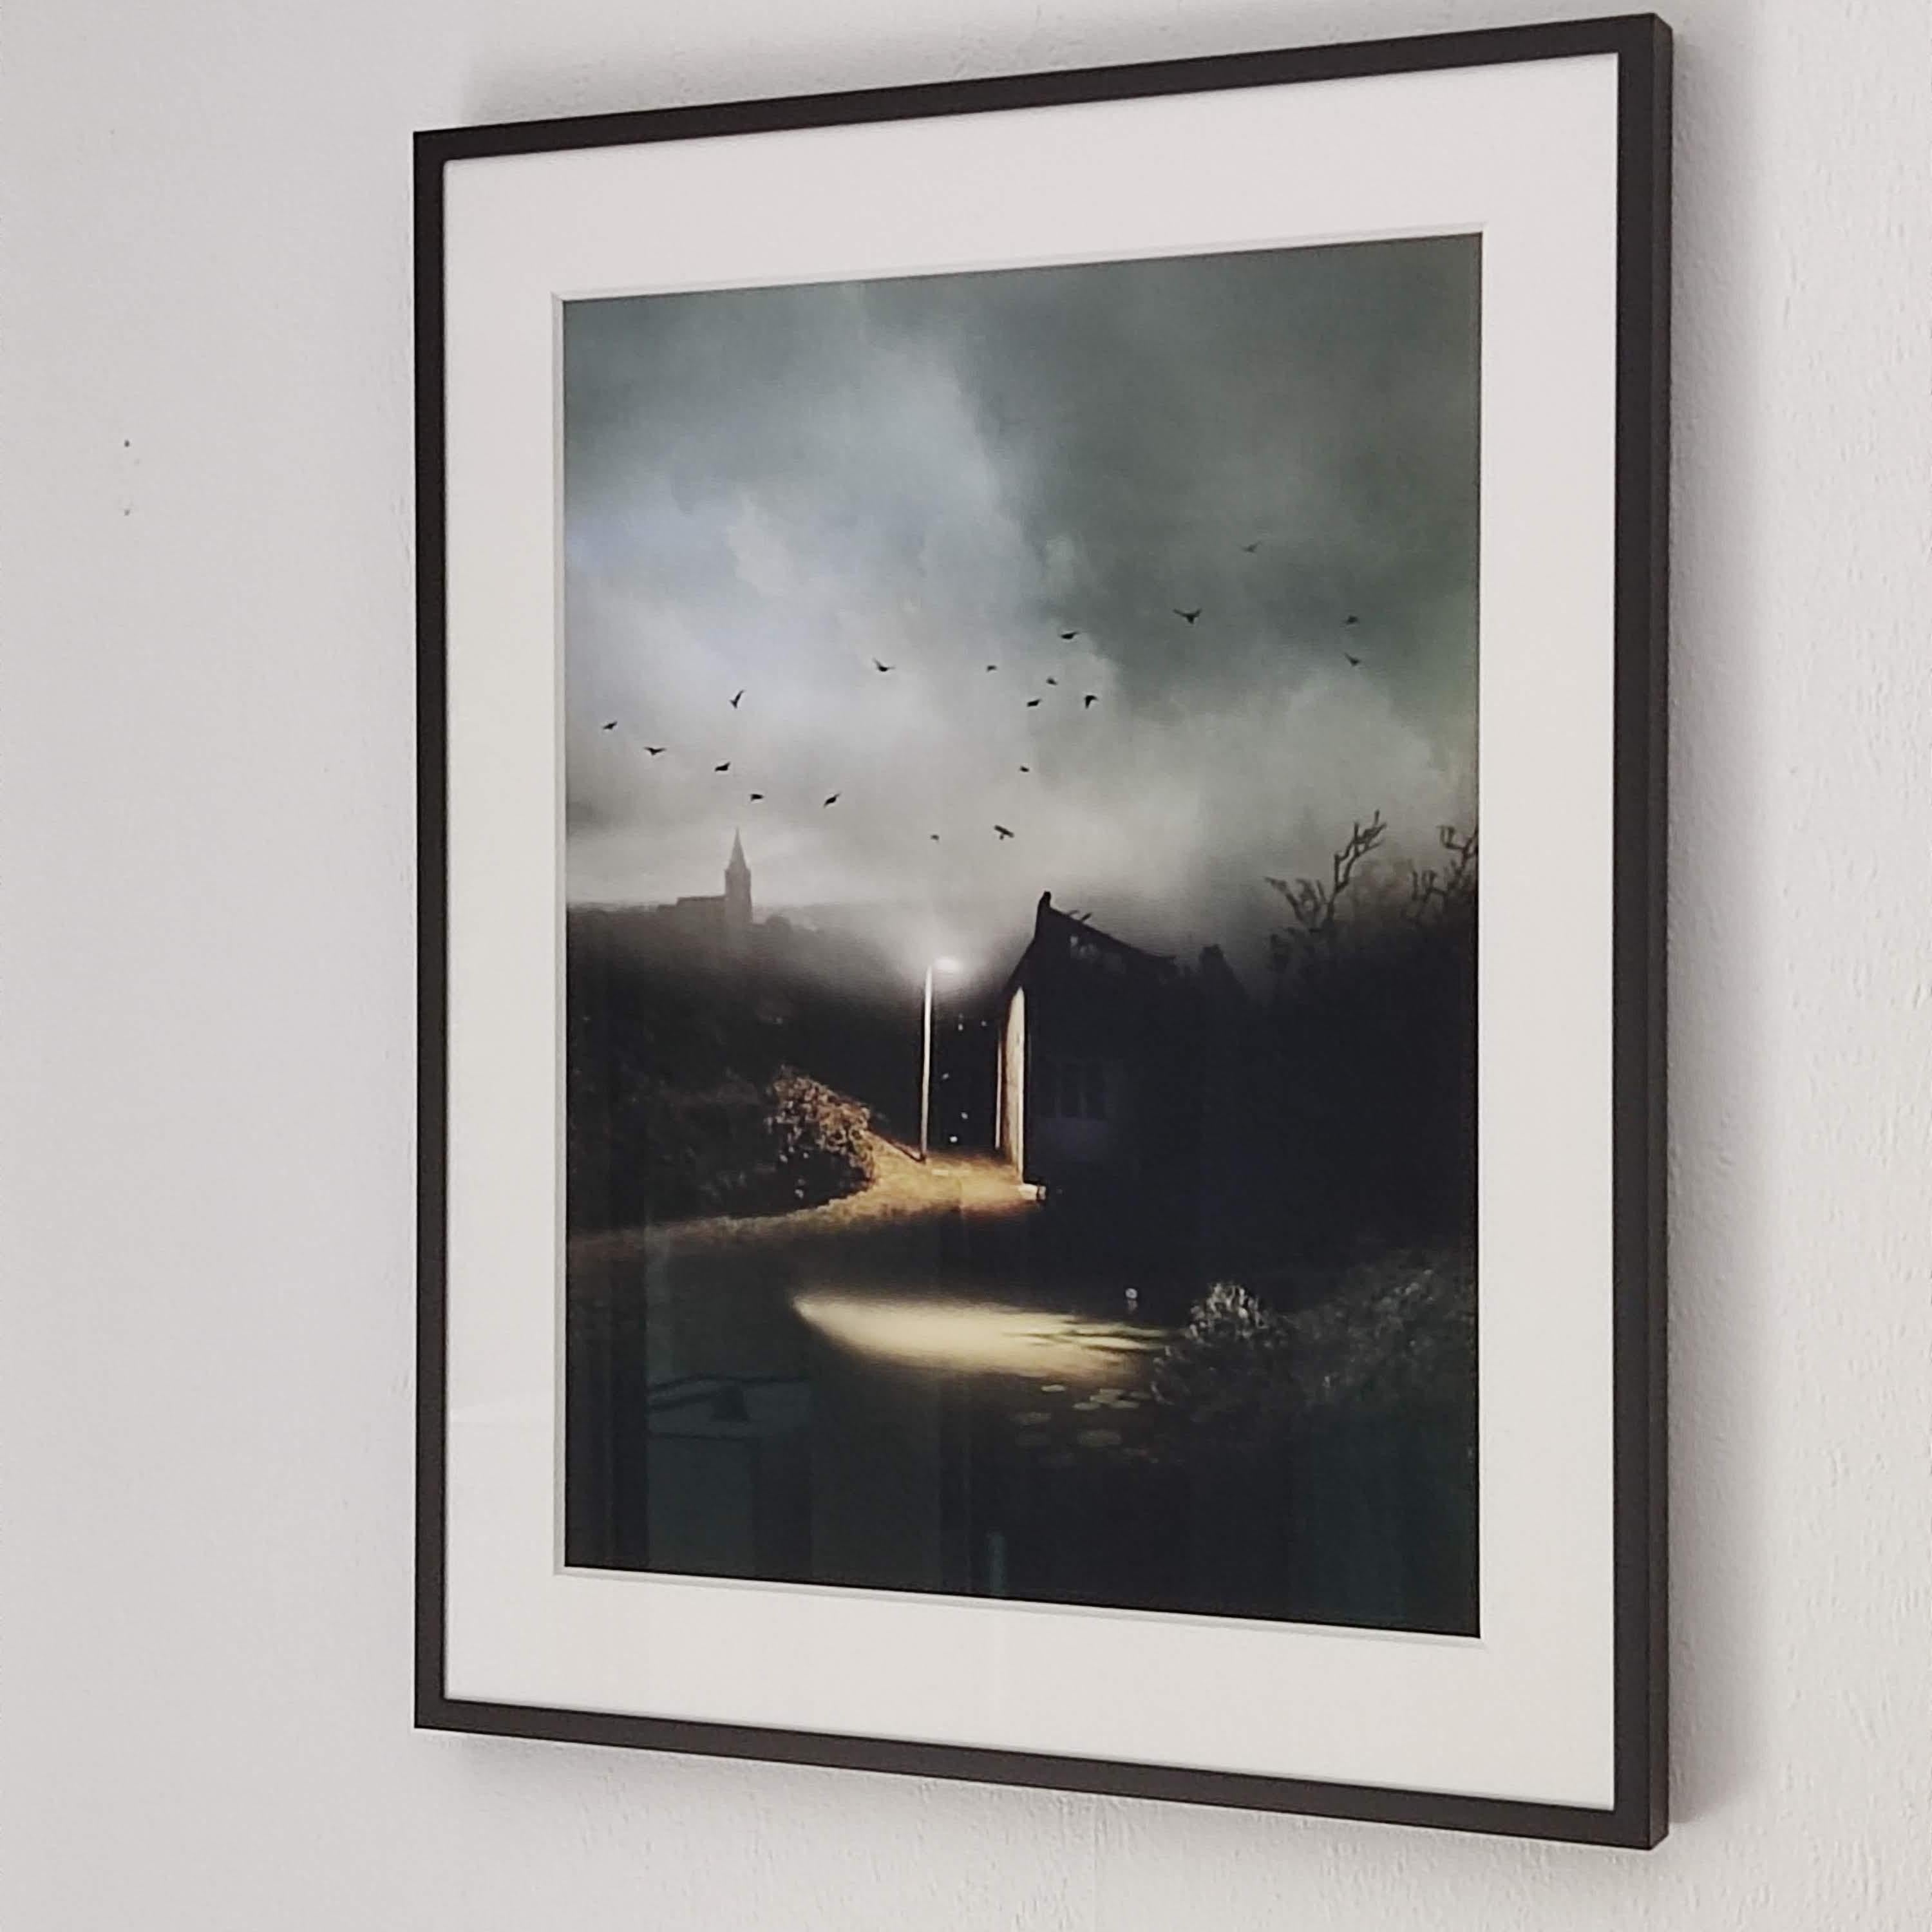 Congregation - Landscape Photography, Birds - Contemporary Print by Suzanne Moxhay